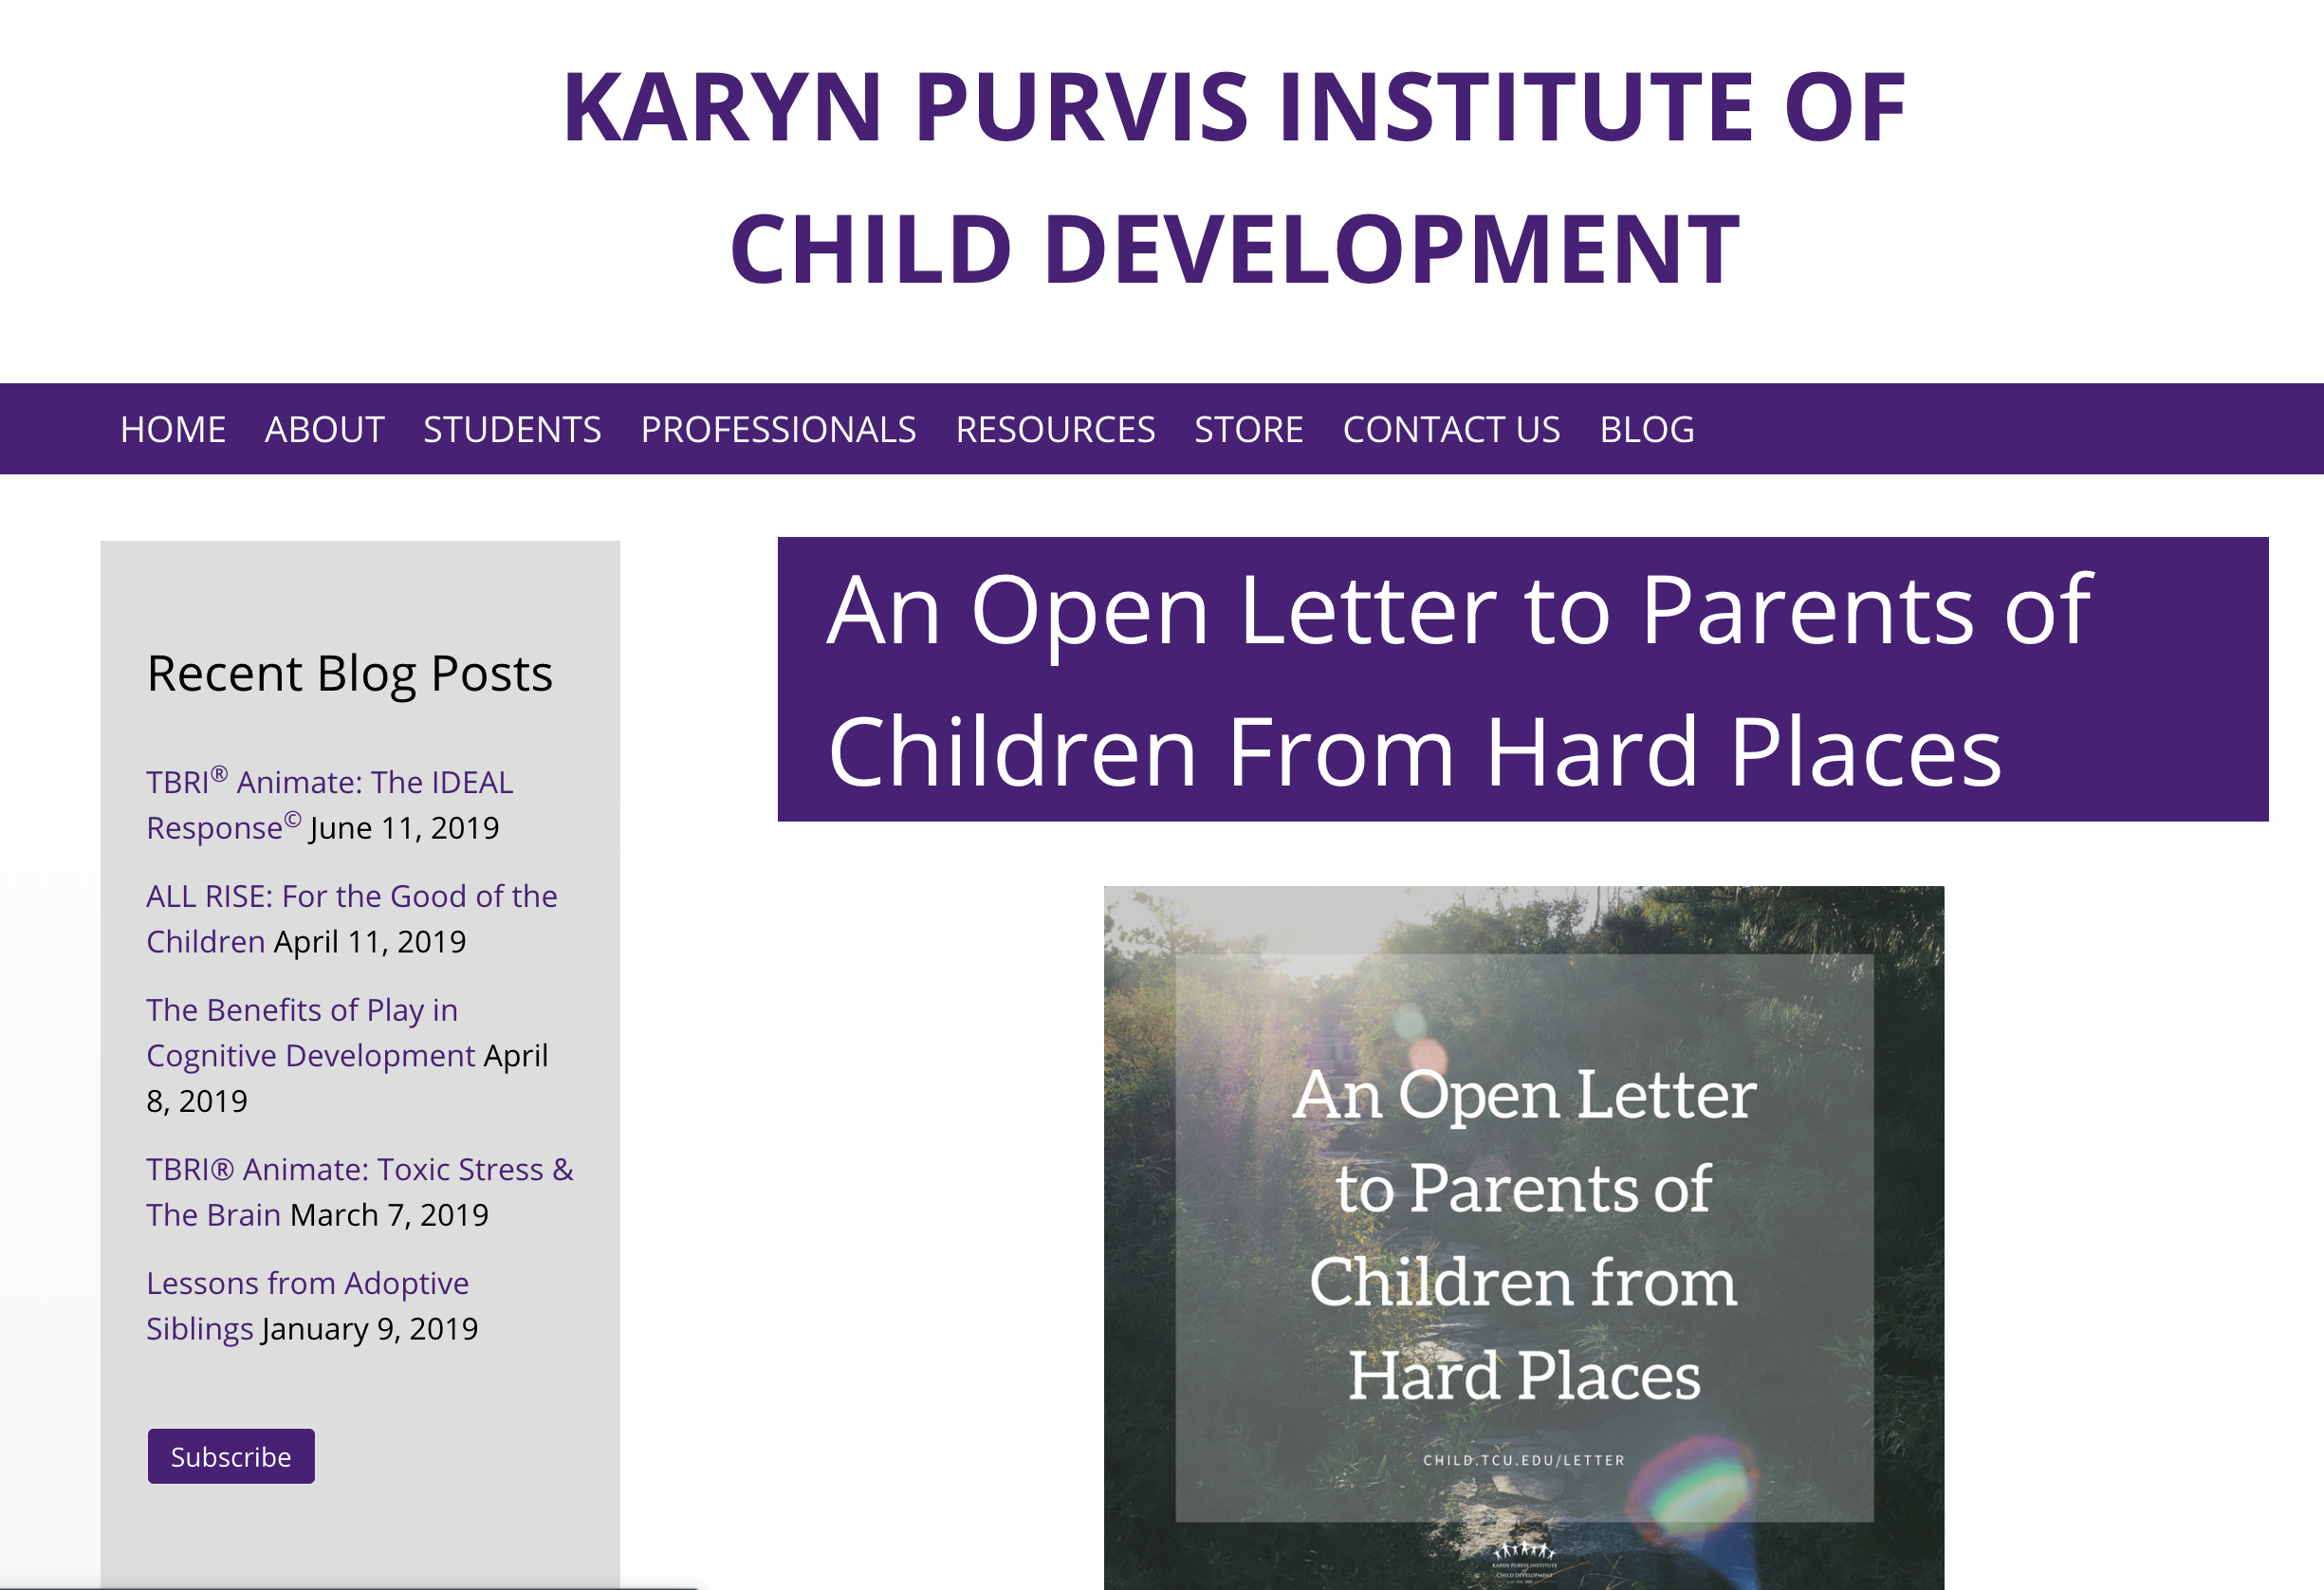 Image of Karyn Purvis Institute of Child Development Blog Post, An Open Letter to Parents of Children from Hard Places